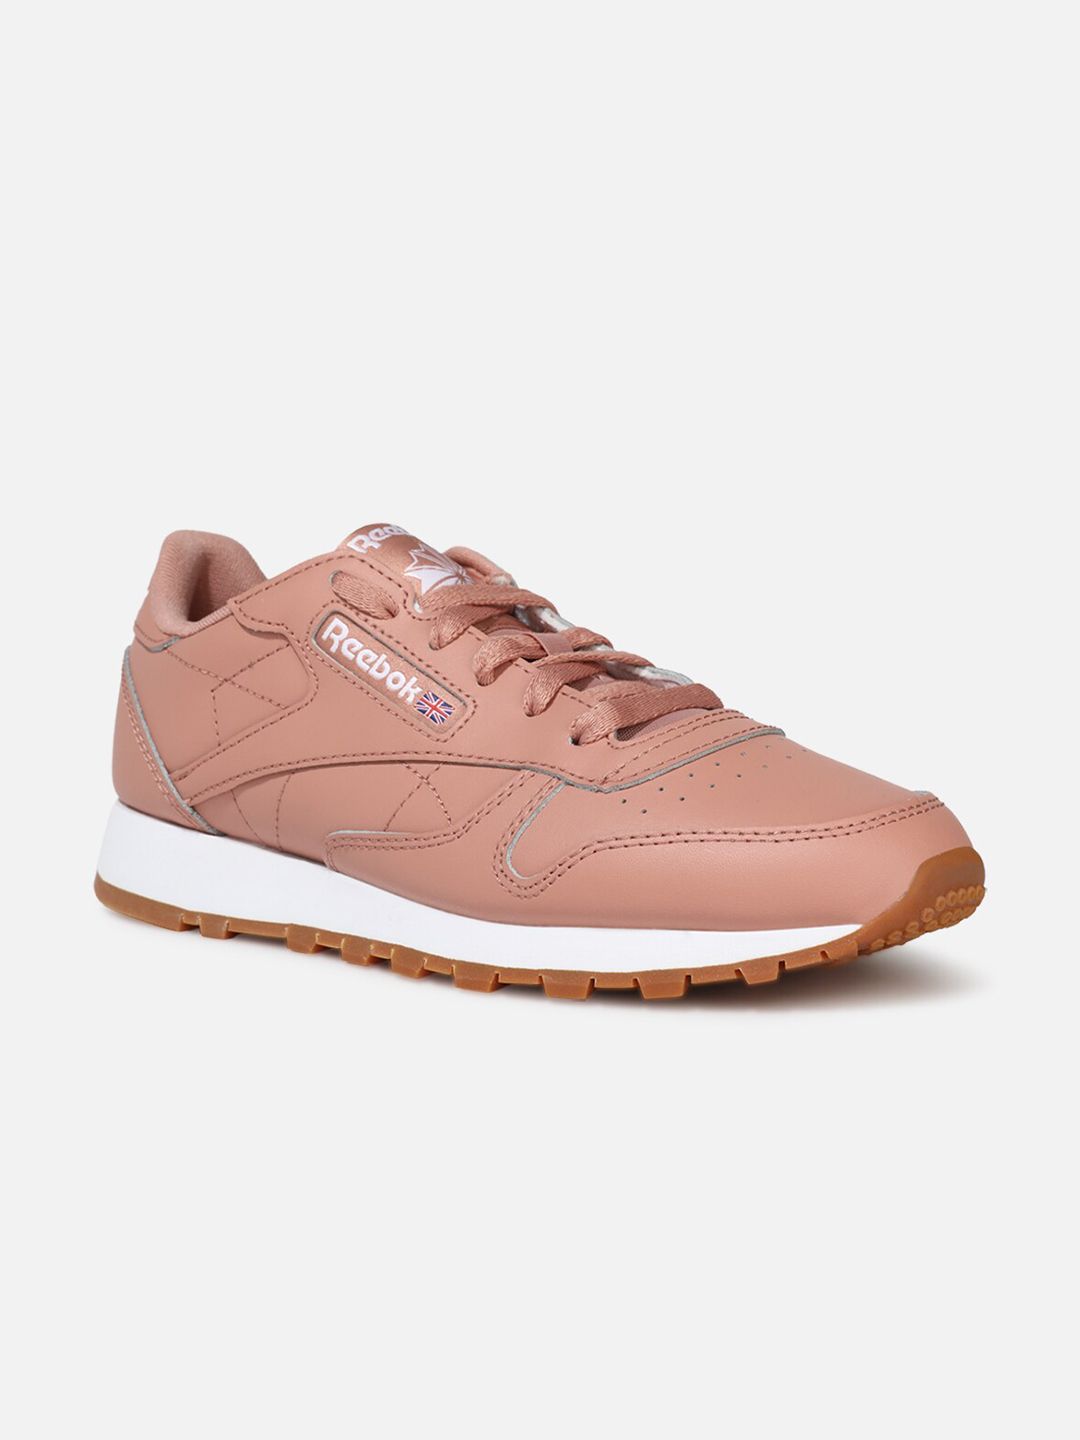 Reebok Women Rbk Classics Classic Leather Running Shoes Price in India